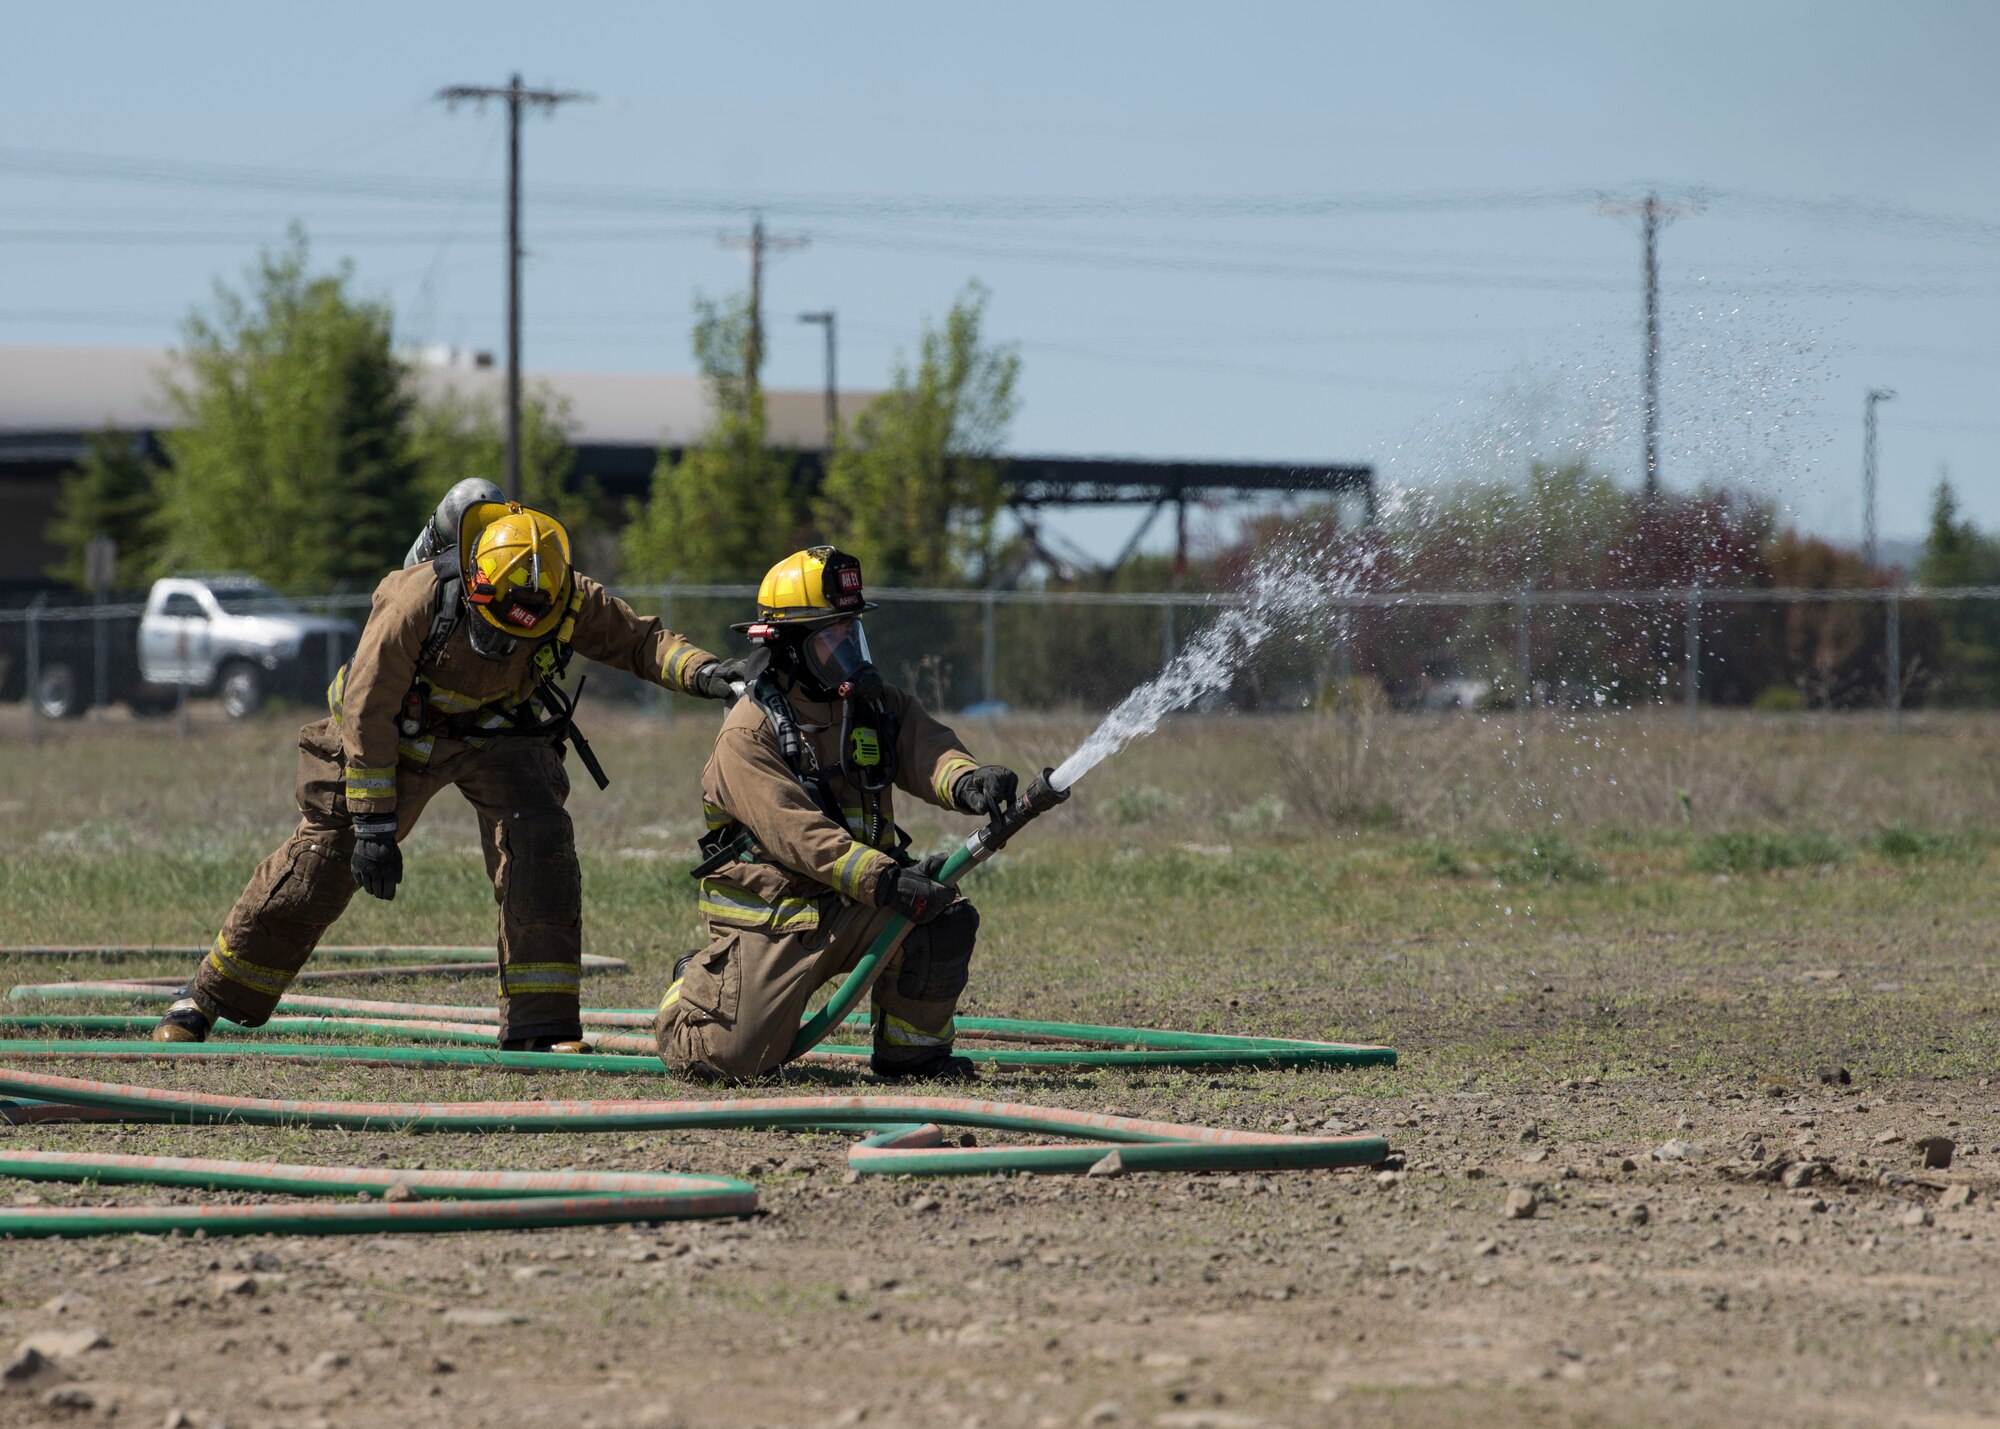 Firefighters from the Airway Heights Fire Department test hose pressure while preparing for a Major Accident Response Exercise drill near Fairchild Air Force Base, Washington, May 9, 2019.